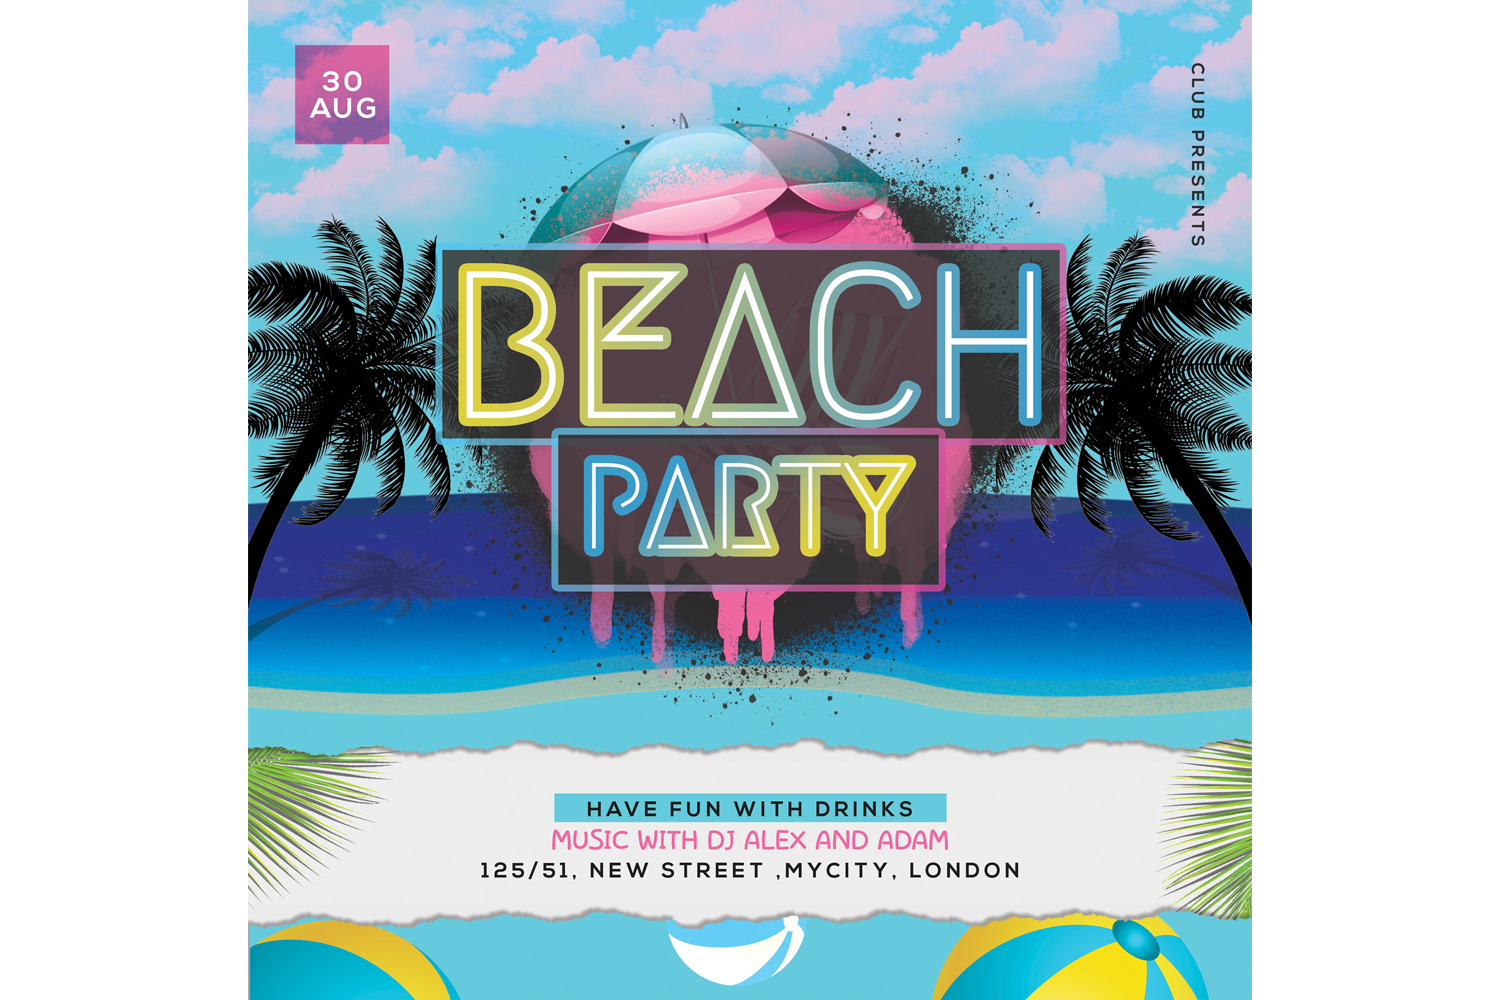 Beach Party-Layered Flyer Template